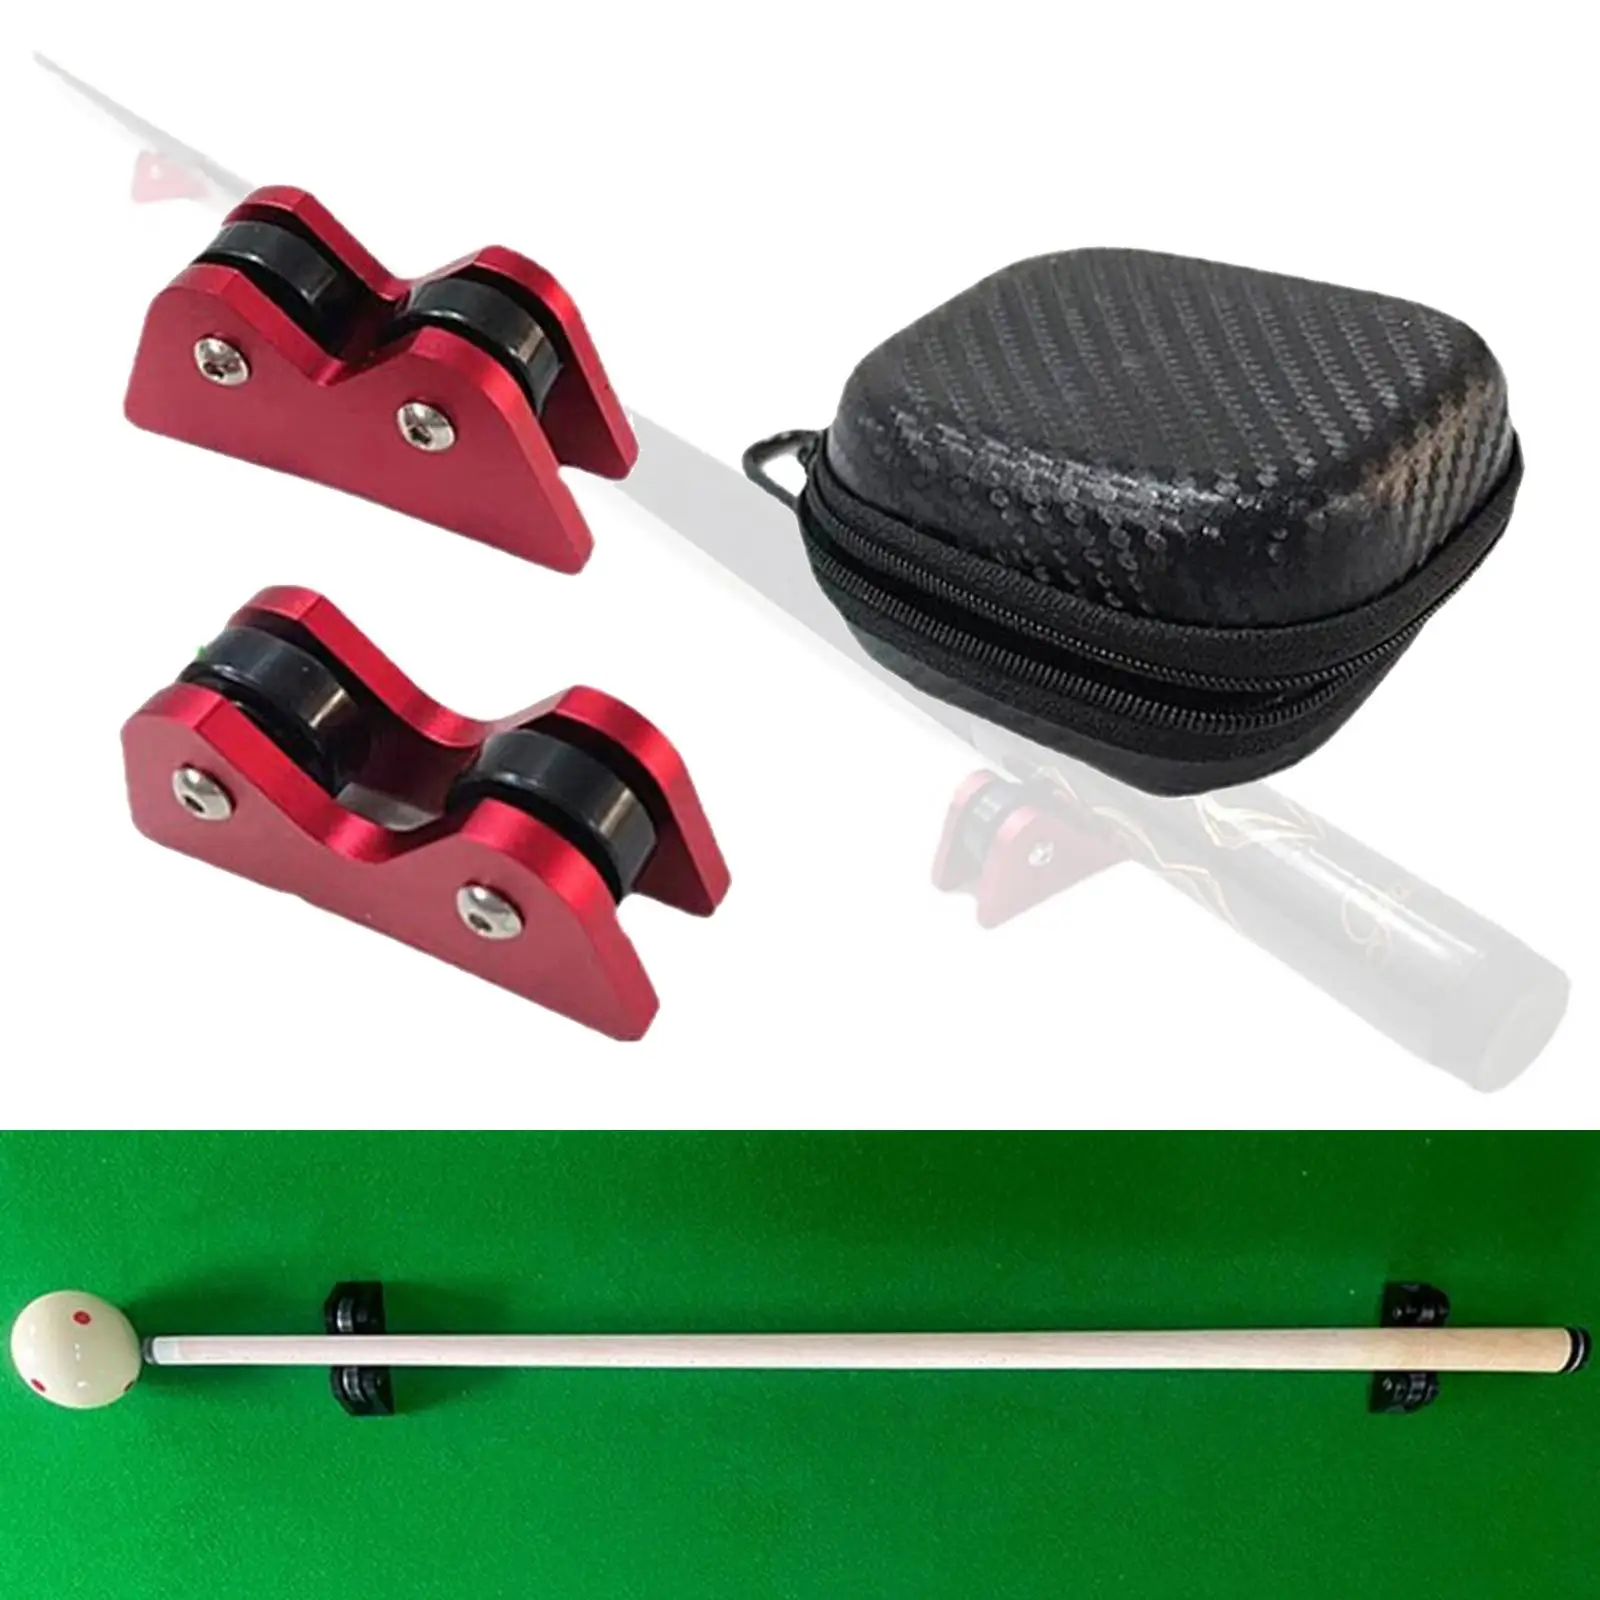 2x Pool Billiards Straightness Checker with Carry Case Snooker Club Wheels